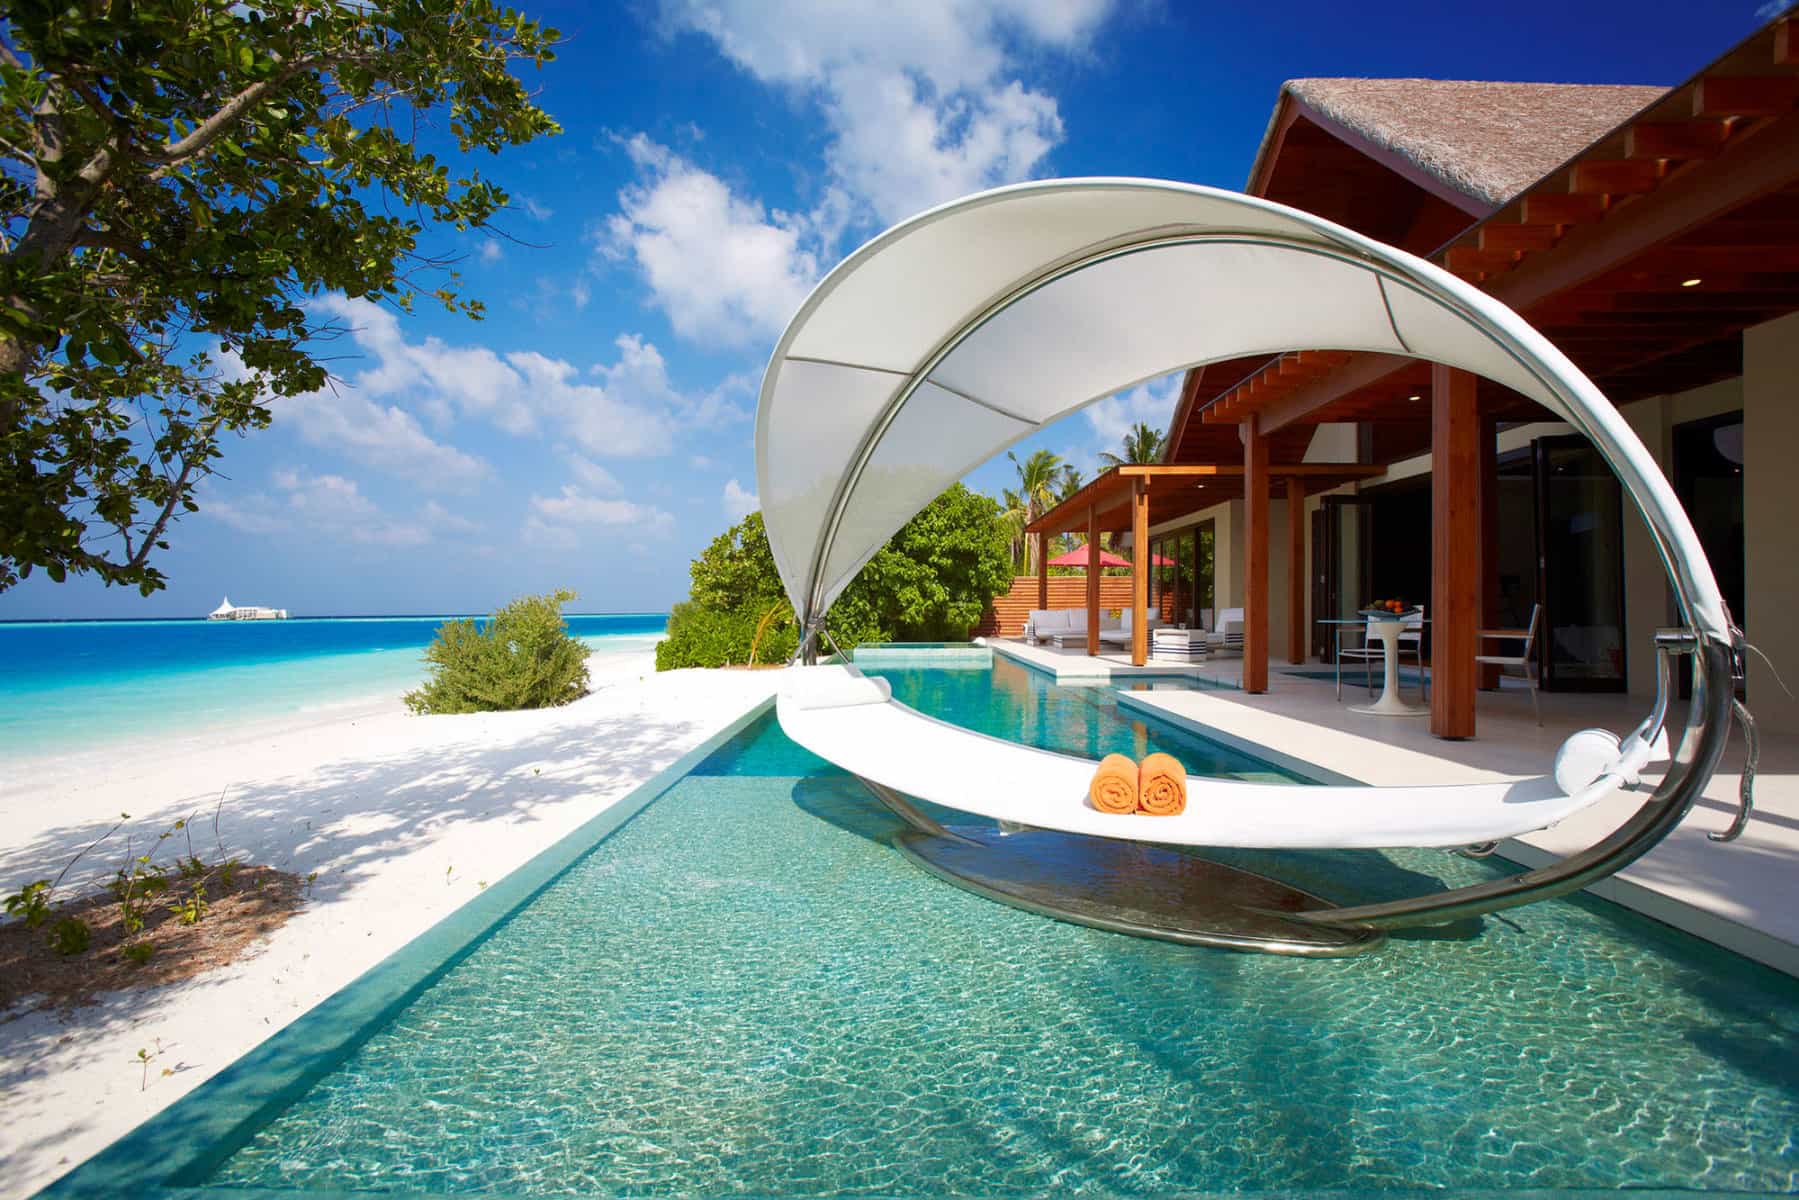 Three of the most Luxurious Holiday Destinations on the Planet